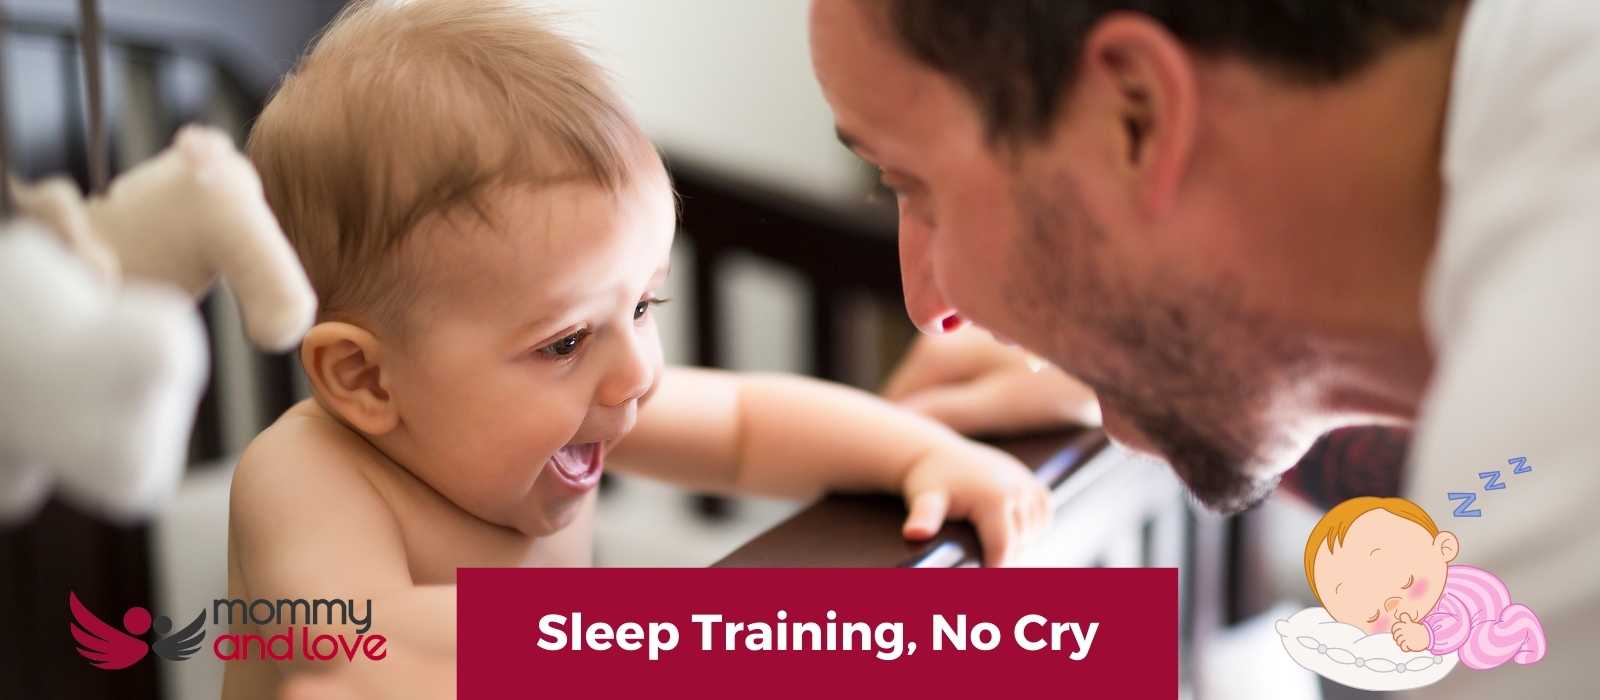 Sleep Training, No Cry: How to Get Baby to Sleep in Crib Without Crying It Out